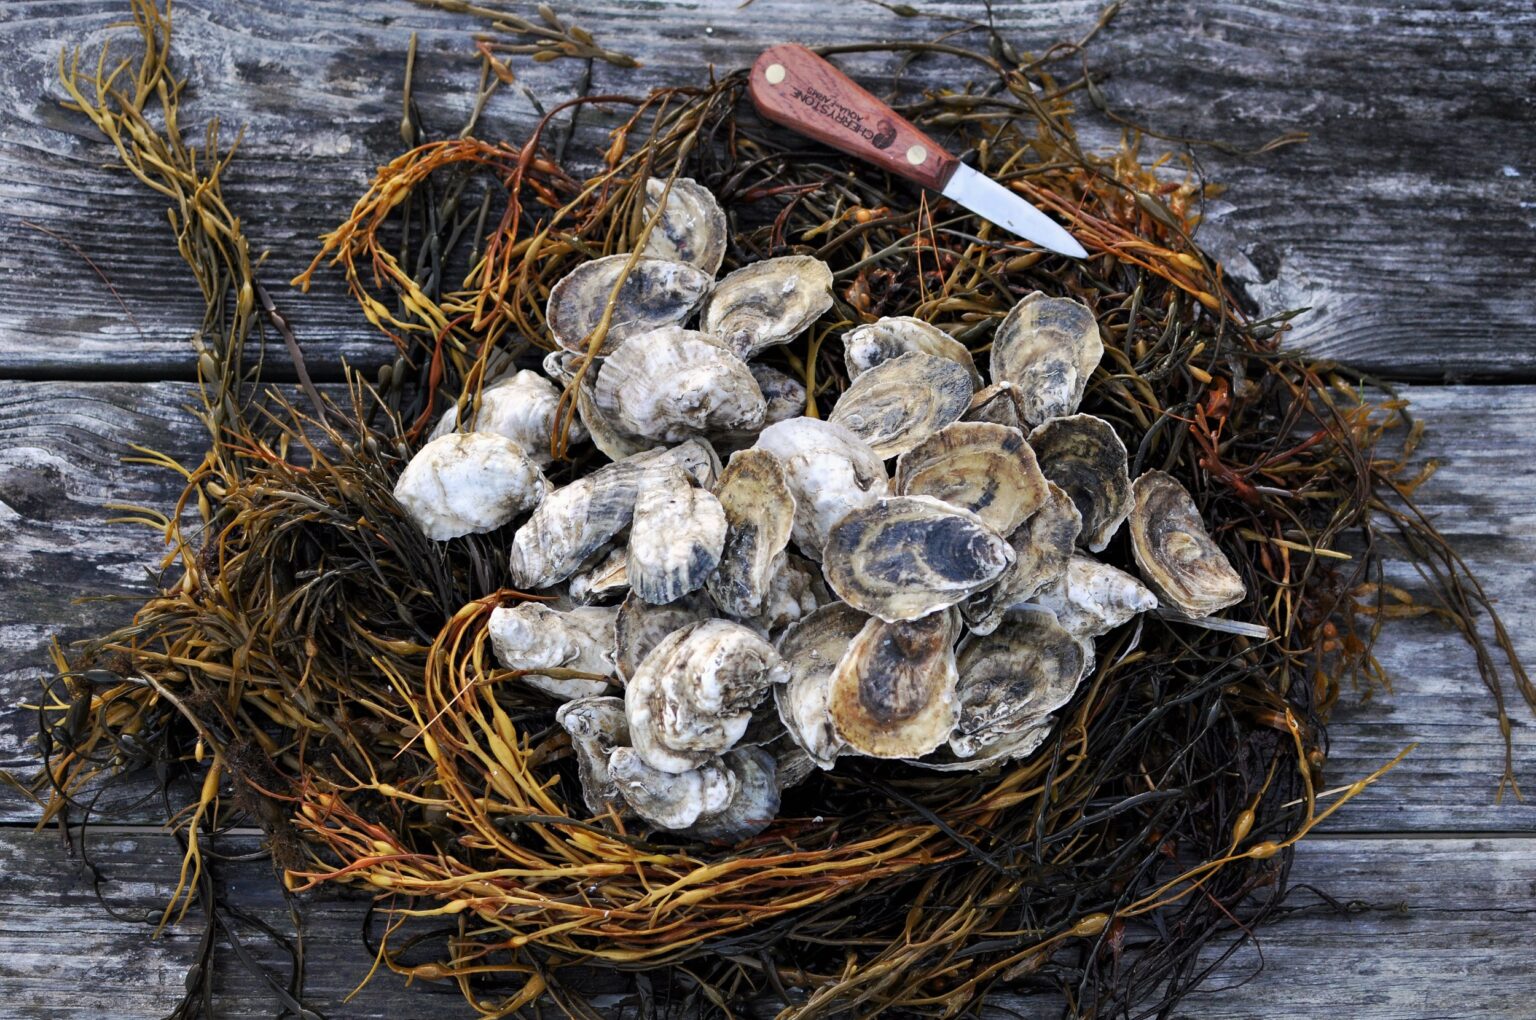 Chunus and Misty Points | The Two Finest “Oyster Sisters” on Virginia’s Eastern Shore